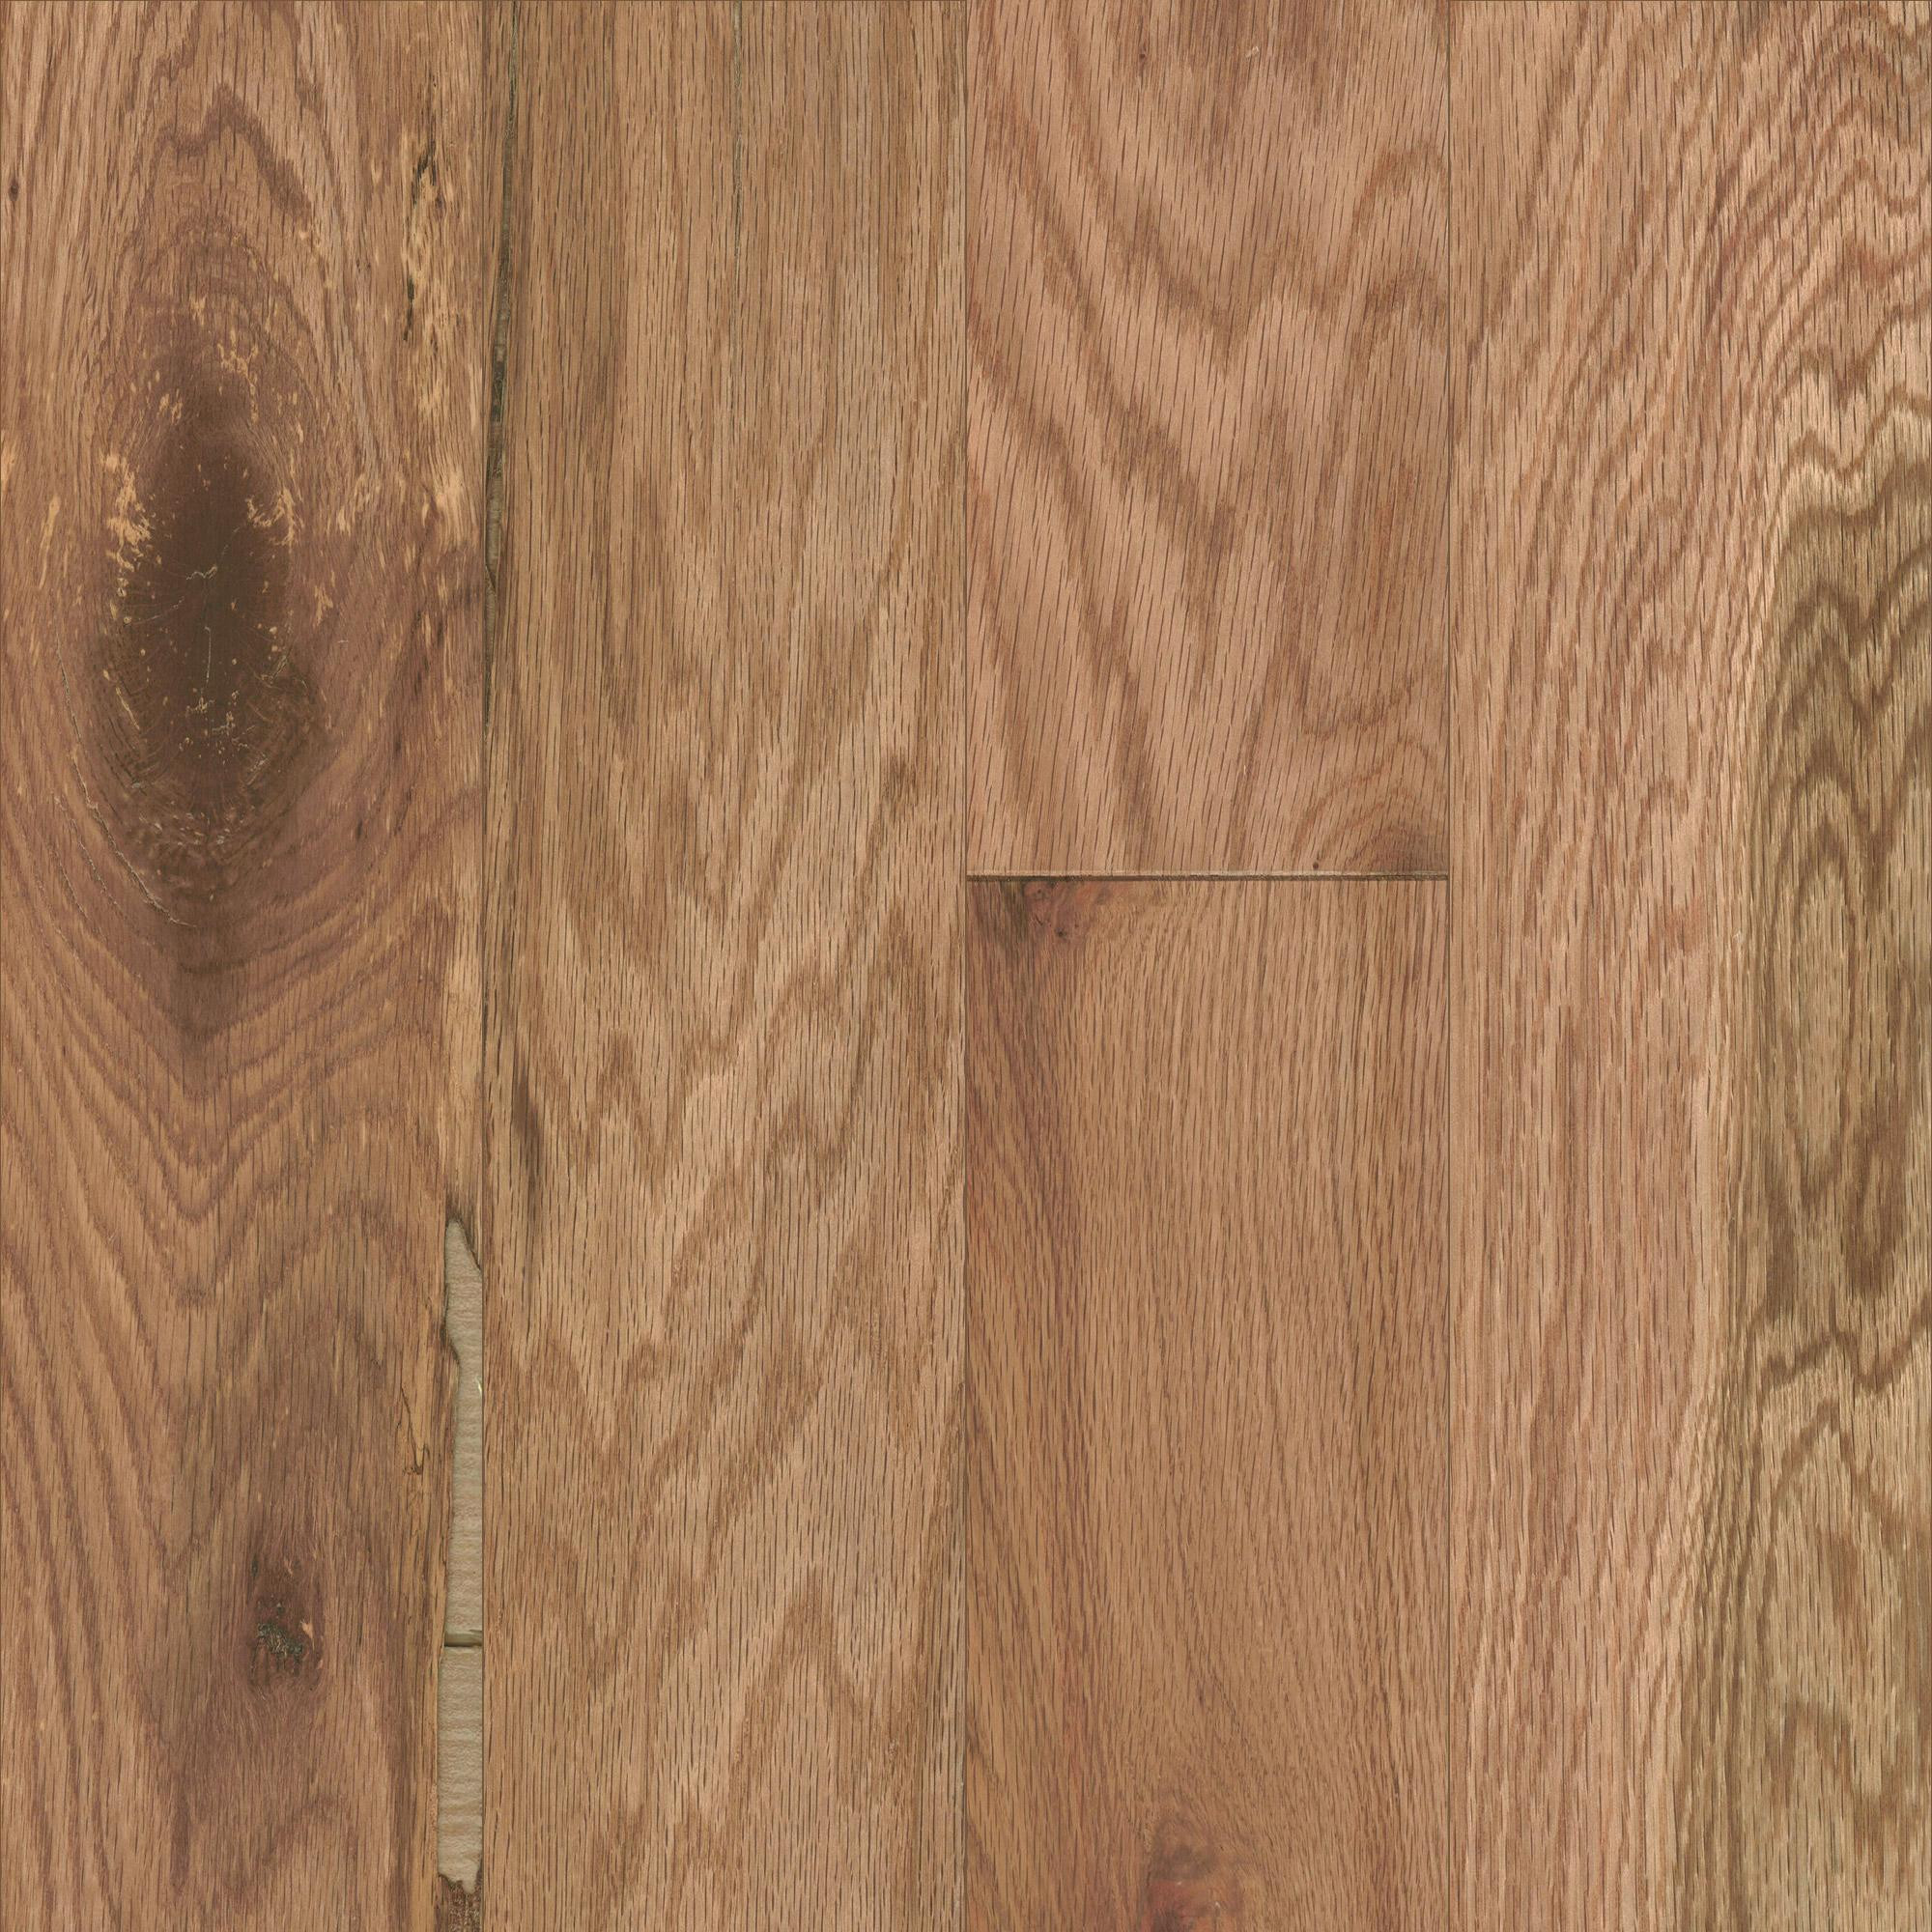 30 Unique Unfinished Engineered Hardwood Flooring Manufacturers 2024 free download unfinished engineered hardwood flooring manufacturers of mullican ridgecrest red oak natural 1 2 thick 5 wide engineered pertaining to mullican ridgecrest red oak natural 1 2 thick 5 wide en